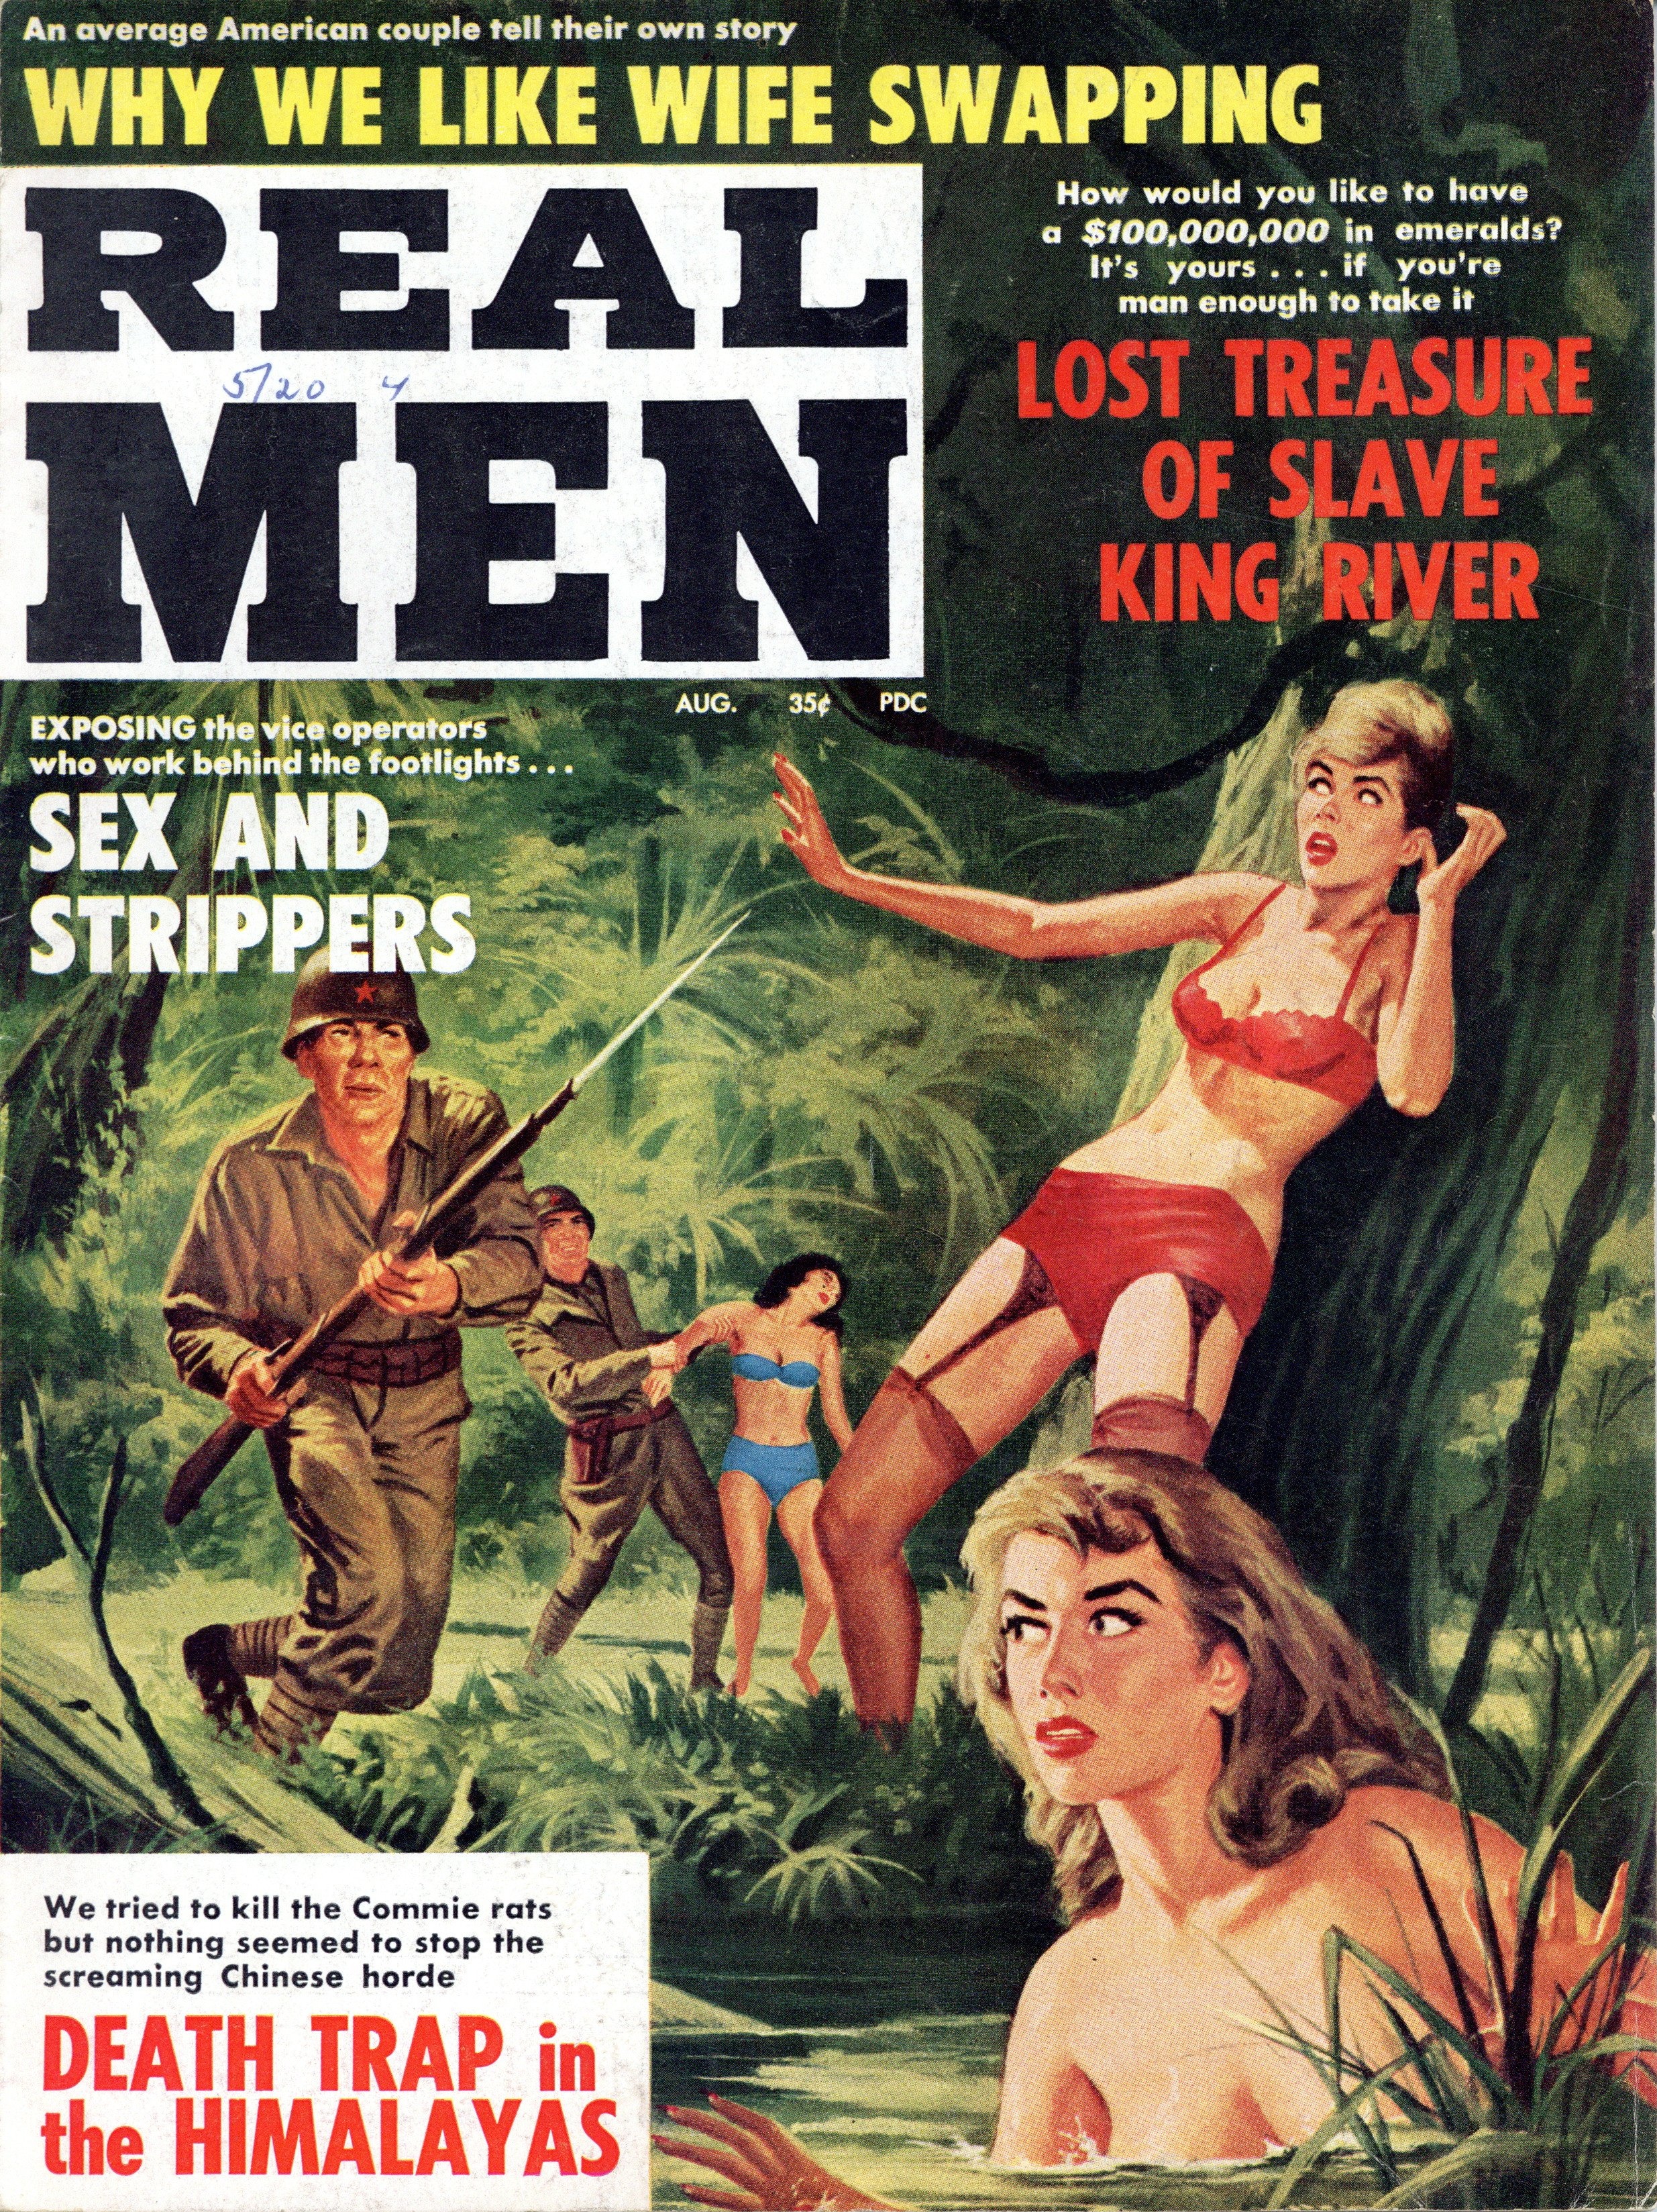 Lost Treasure Of Slave King River -- Pulp Covers